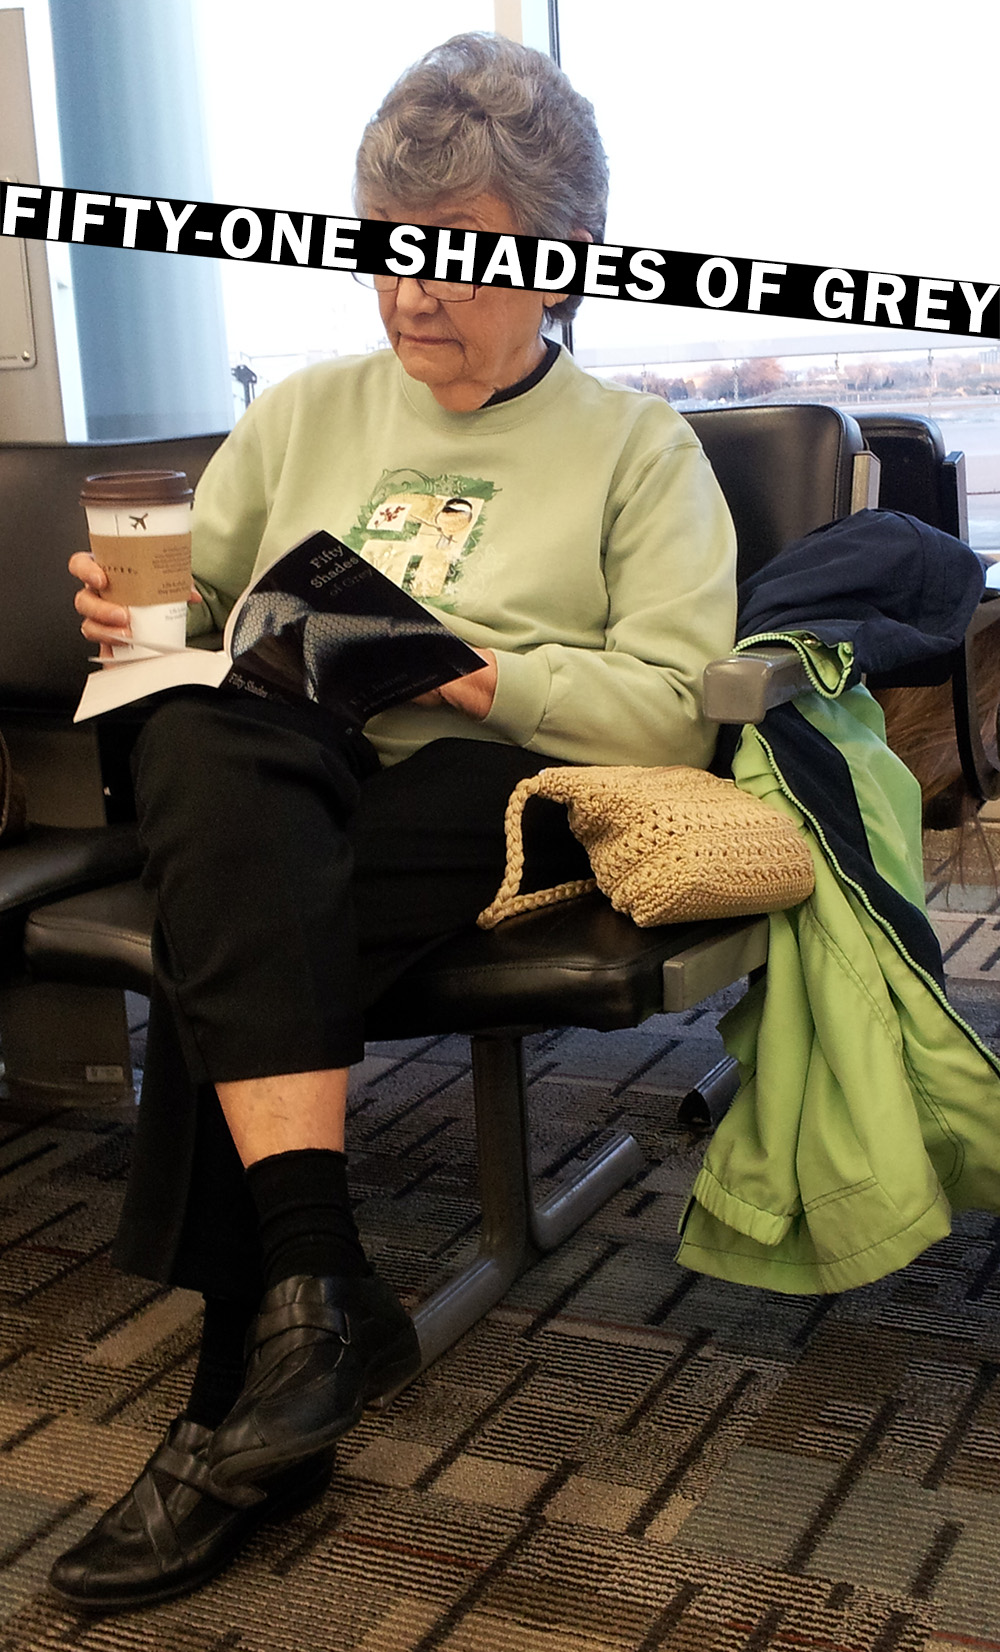 An old woman reads Fifty Shades of Grey in airport.